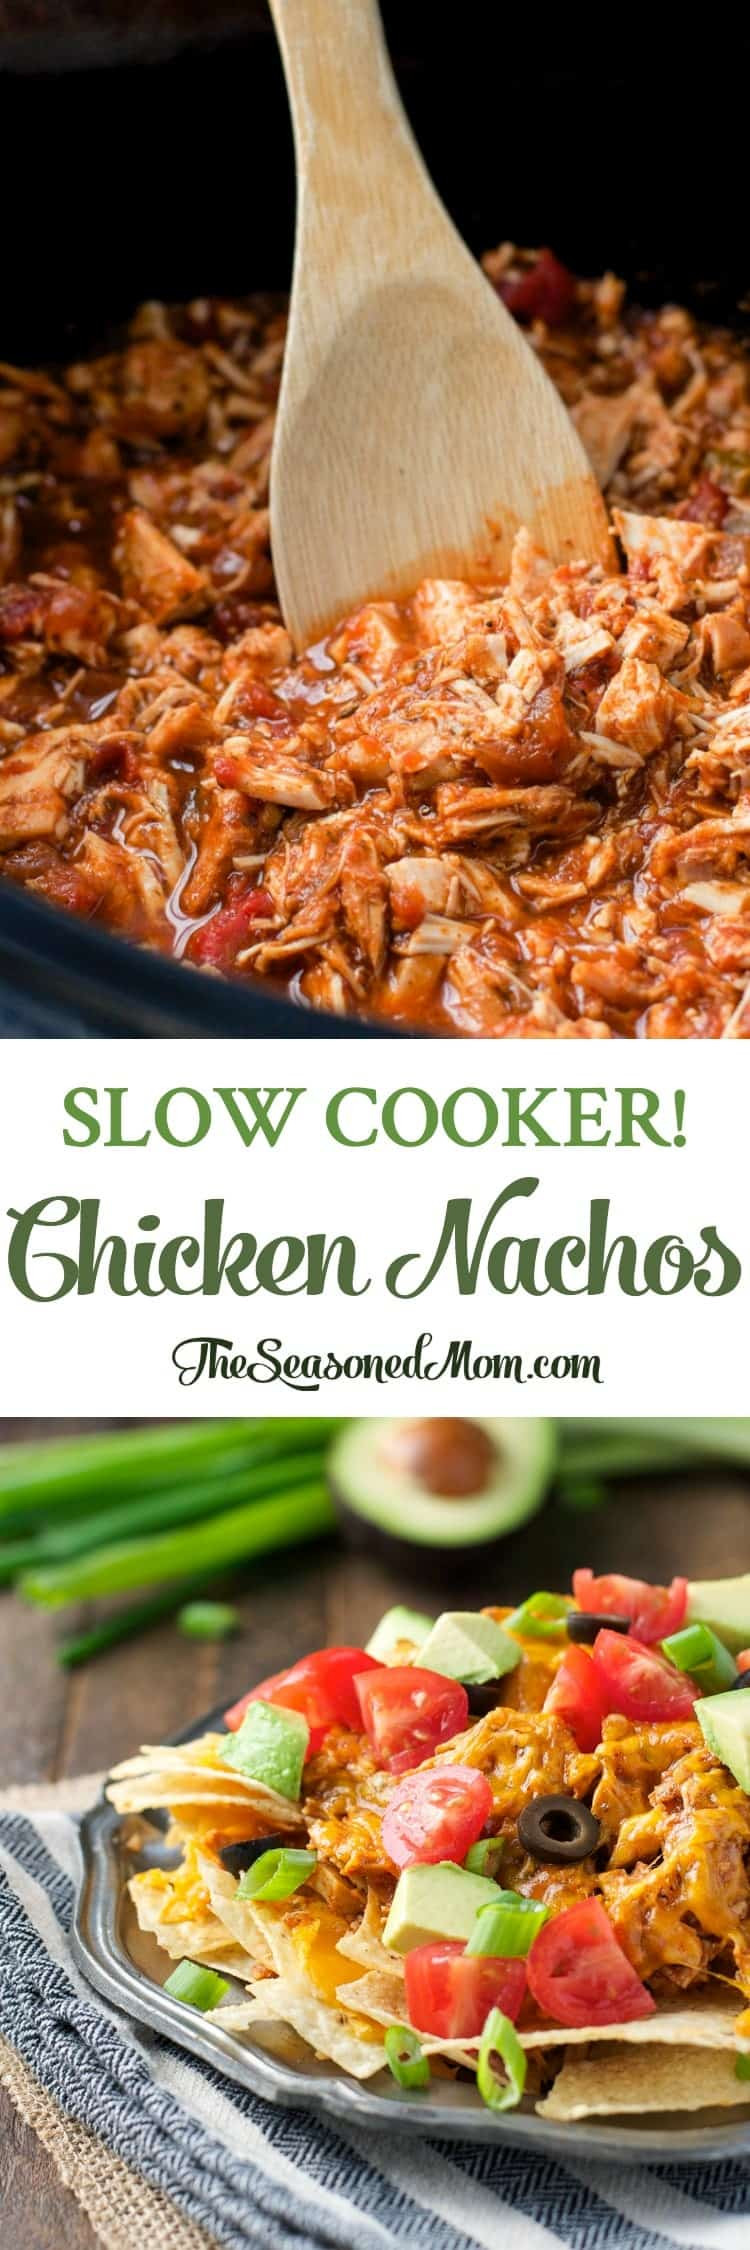 Slow Cooker Appetizers For Party
 Slow Cooker Chicken Nachos The Seasoned Mom